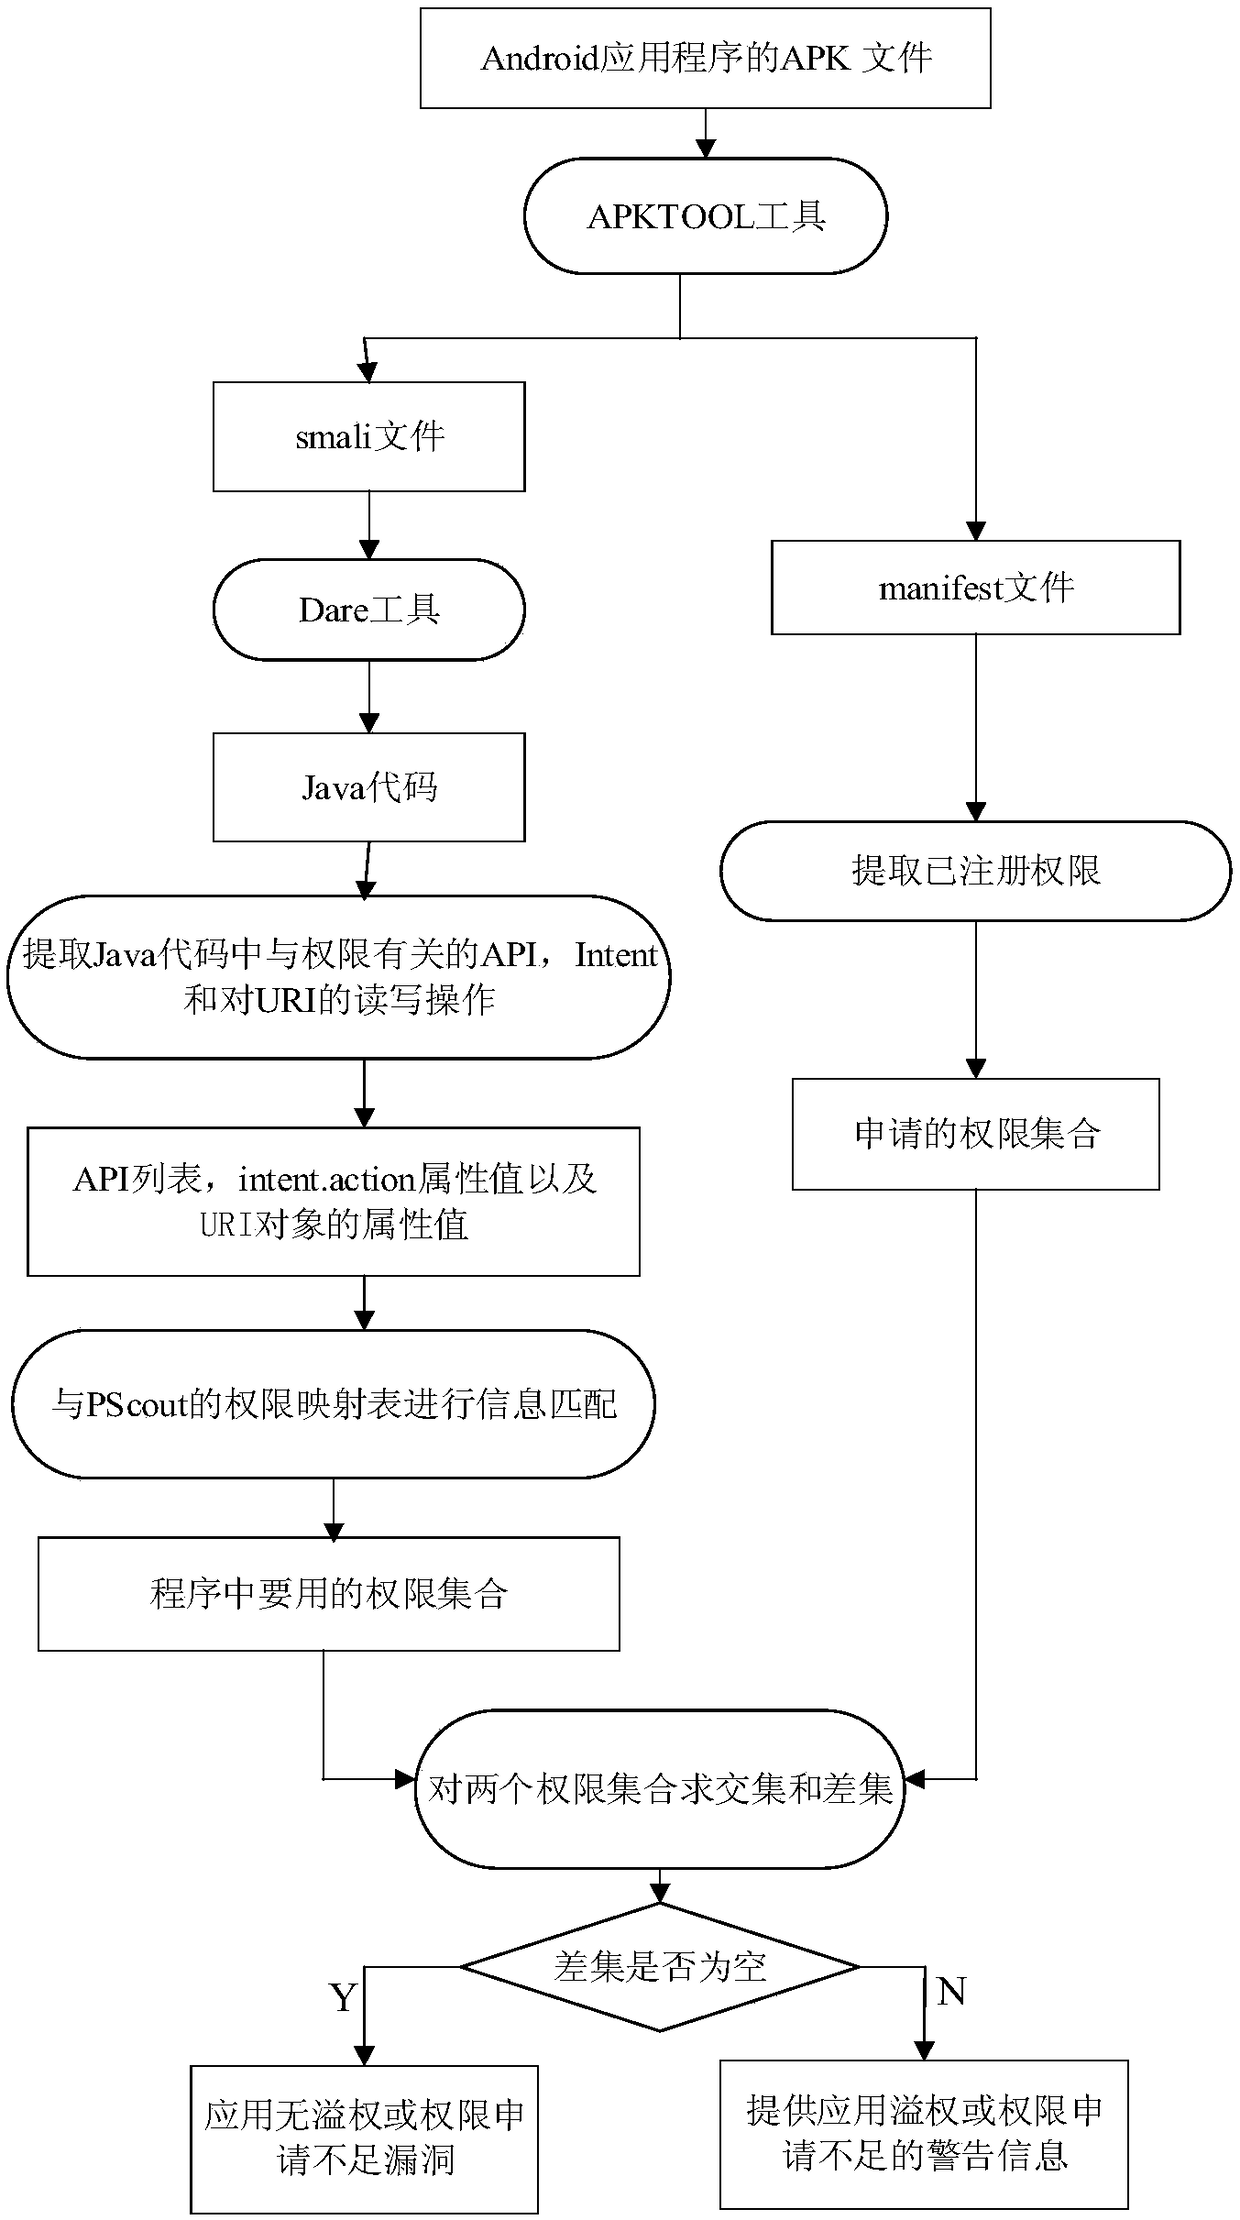 Android application permission overflow vulnerability detection and malicious behavior identification method